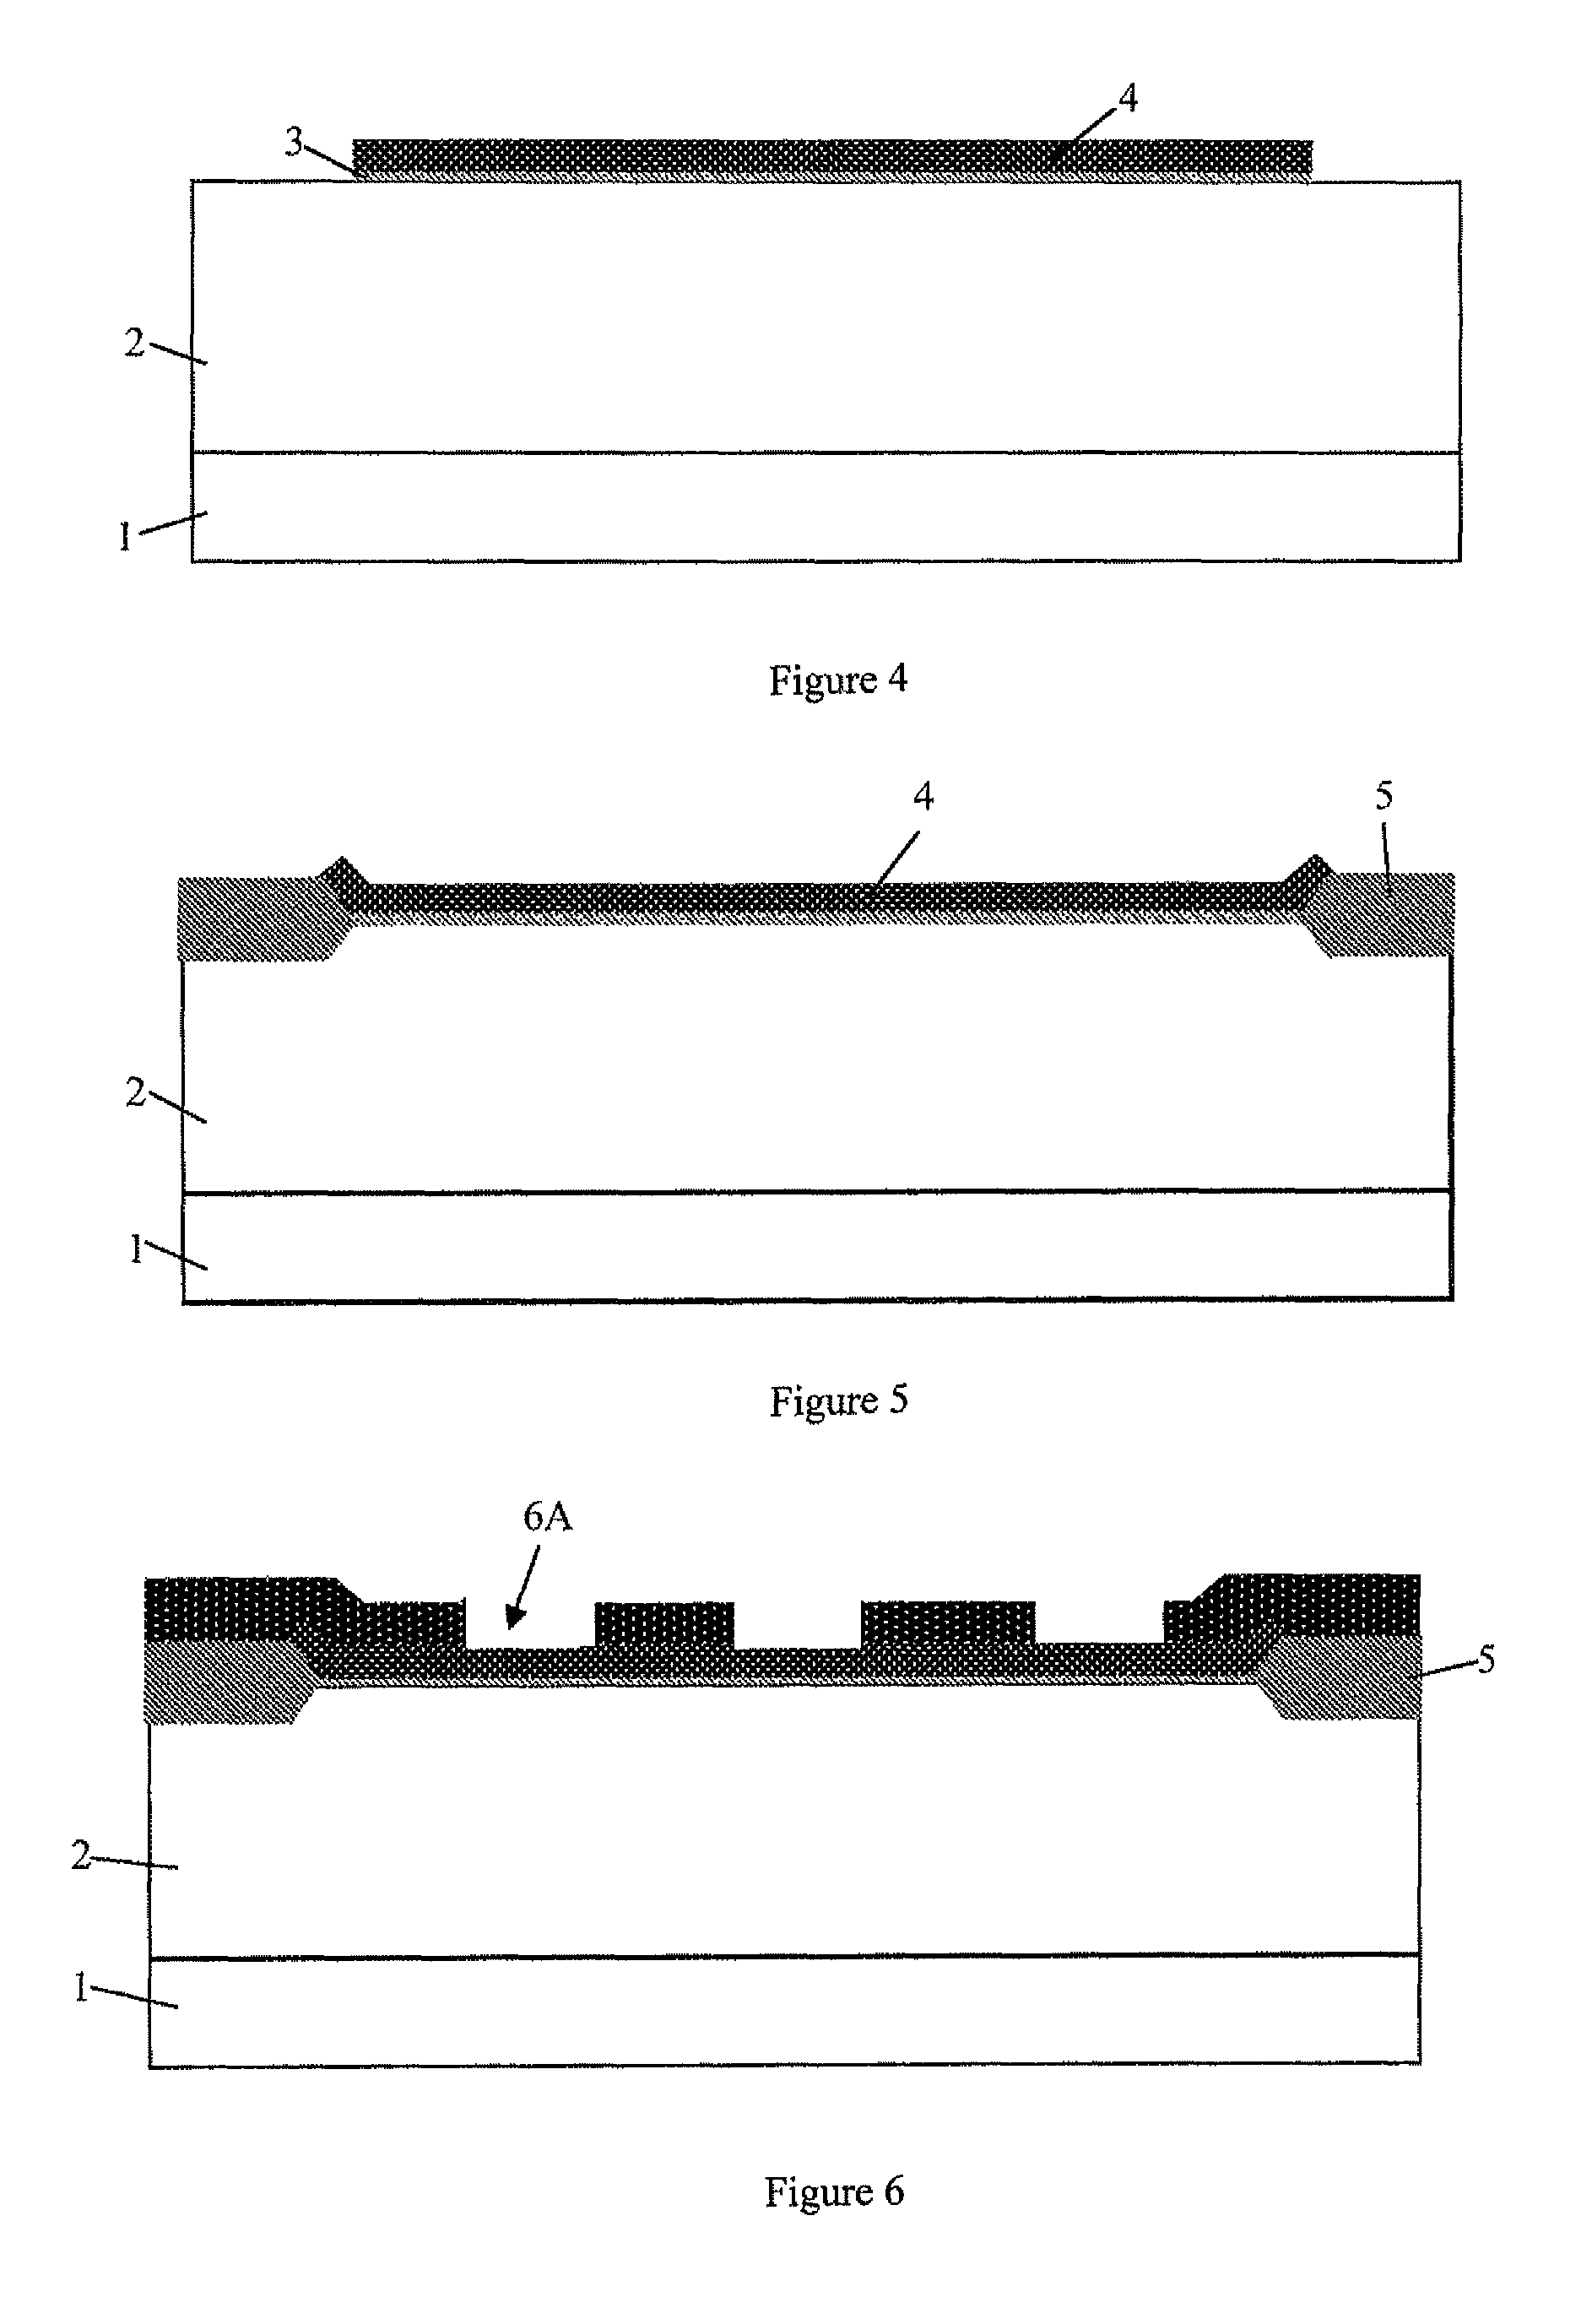 Trench MOSFET with trench contact holes and method for fabricating the same